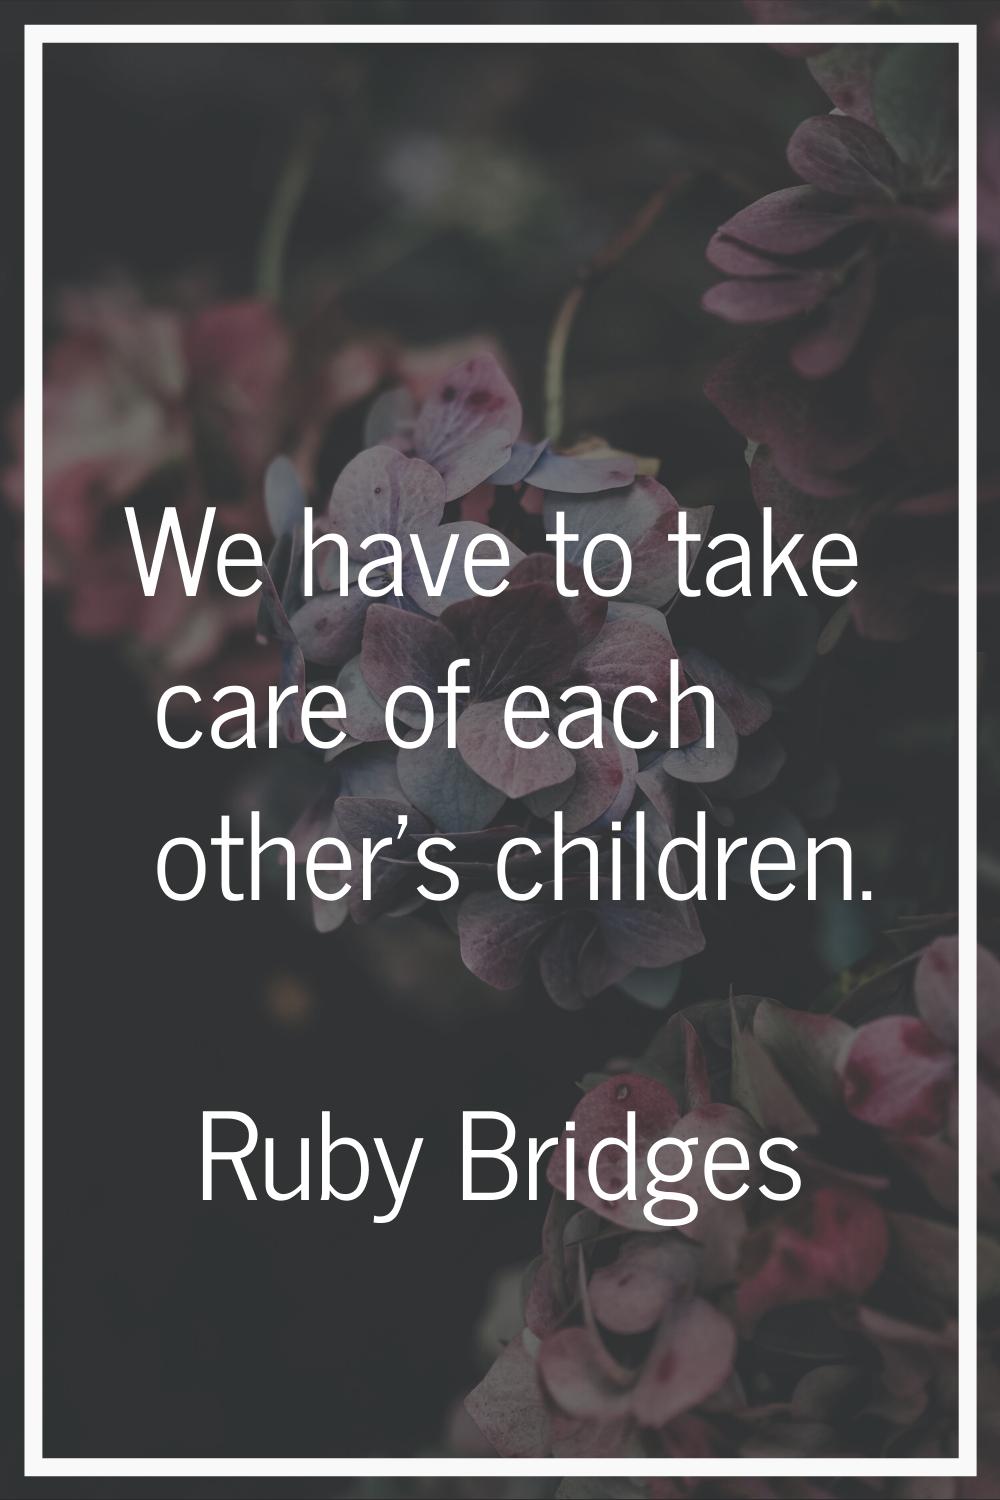 We have to take care of each other's children.